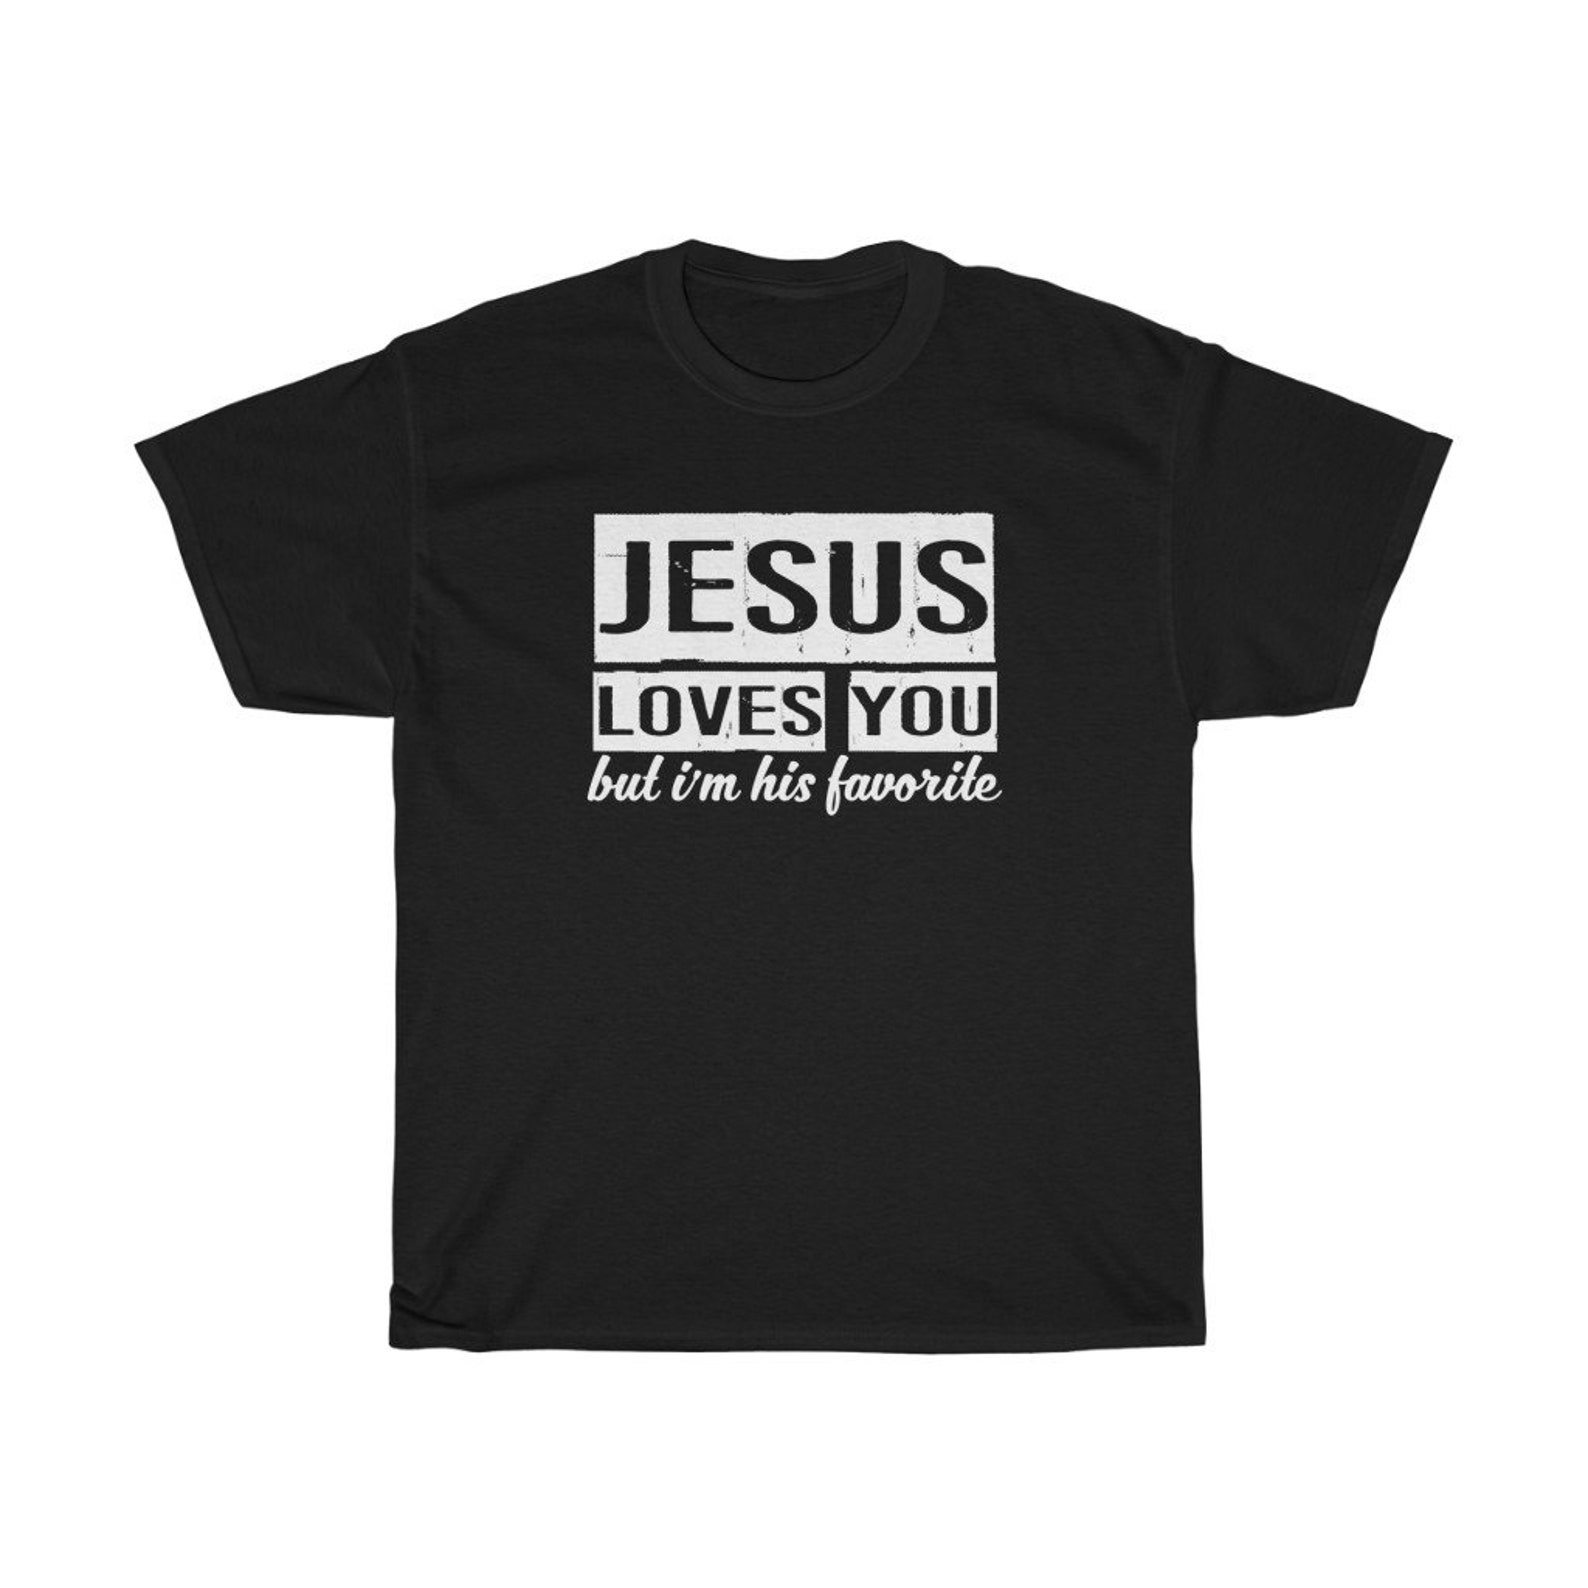 Jesus Loves You unsex tshirt T-shirt for Jesus love | Etsy